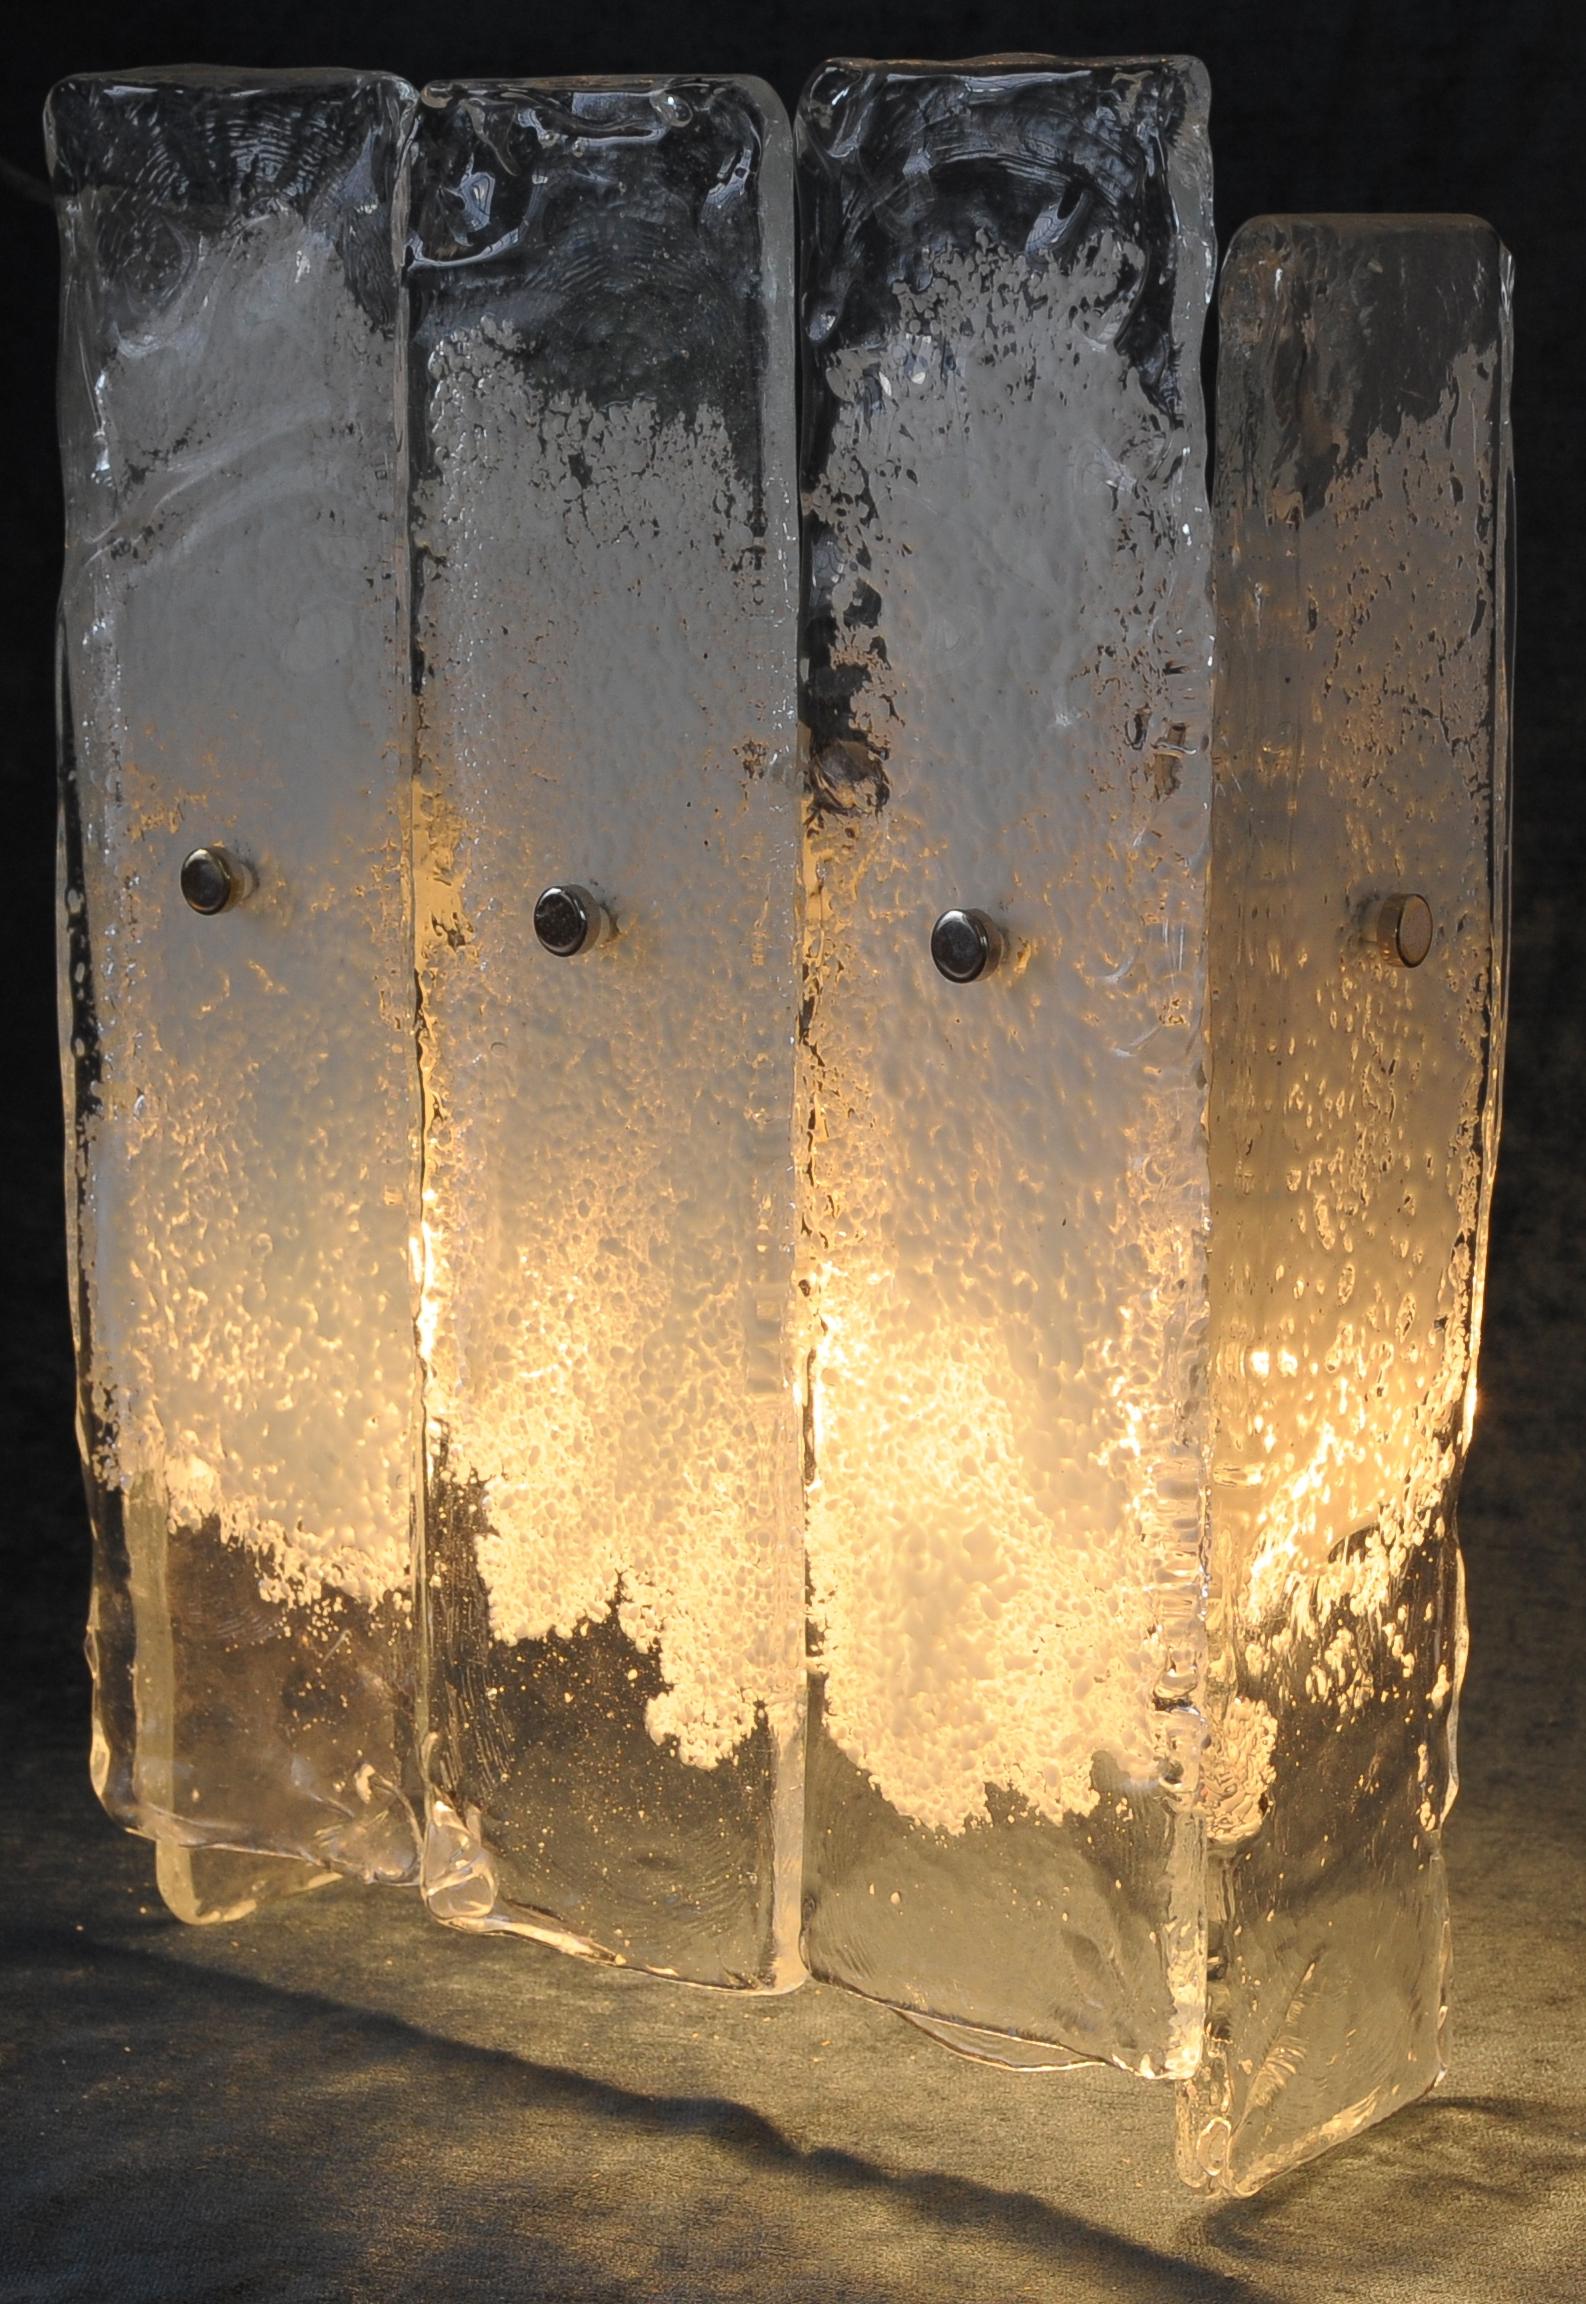  Important Murano Wall Sconces Attributed to Venini, Italy, 1960s (Moderne der Mitte des Jahrhunderts) im Angebot